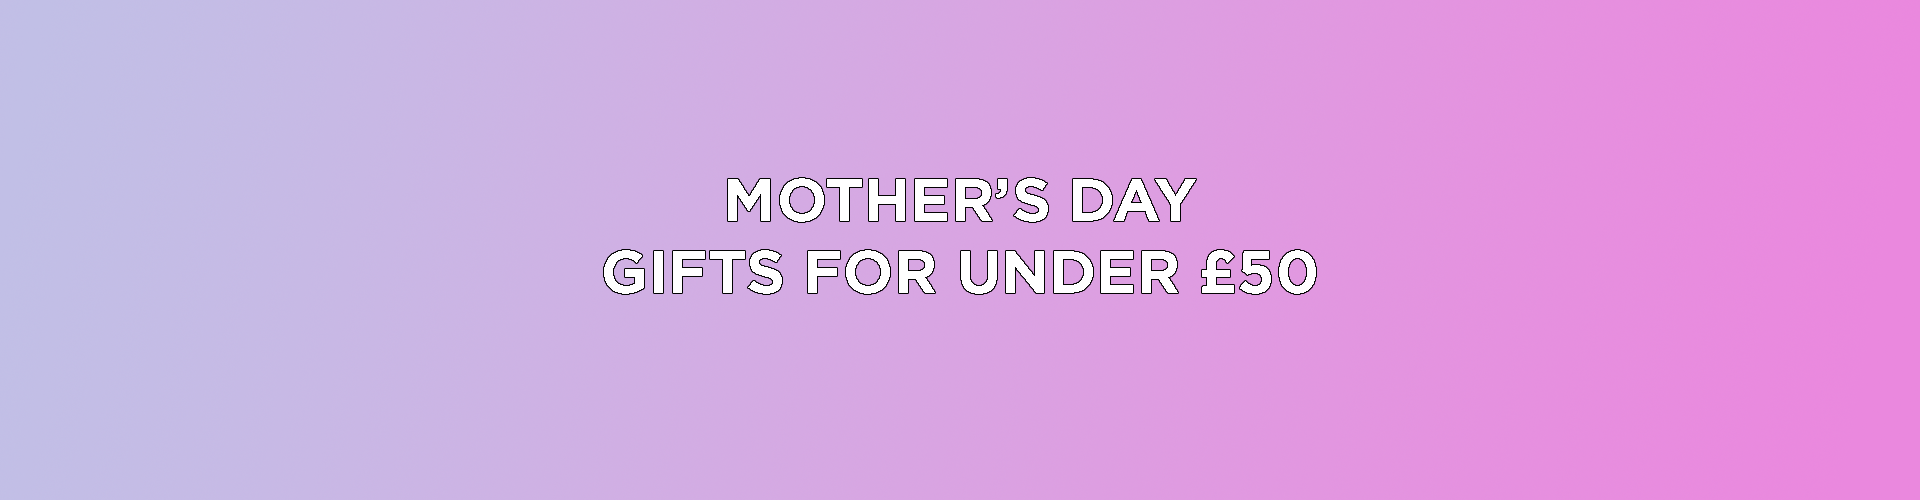 Last-minute Mother's Day gifts: under £50!